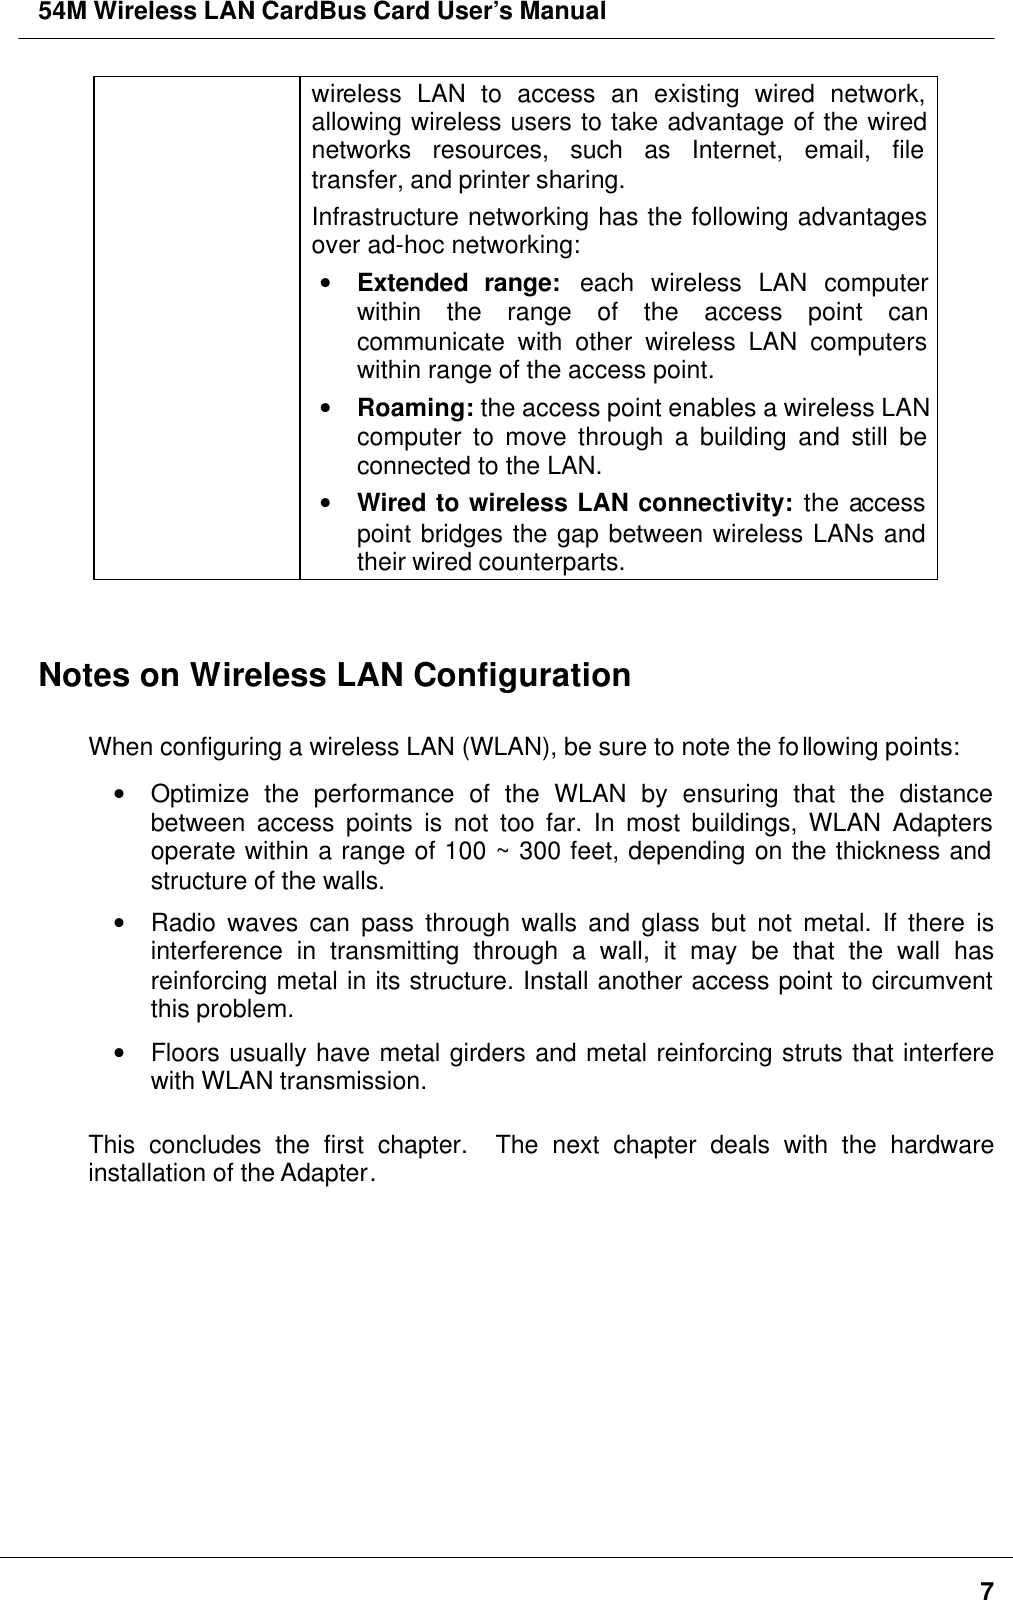 54M Wireless LAN CardBus Card User’s Manual7wireless LAN to access an existing wired network,allowing wireless users to take advantage of the wirednetworks resources, such as Internet, email, filetransfer, and printer sharing.Infrastructure networking has the following advantagesover ad-hoc networking:• Extended range: each wireless LAN computerwithin the range of the access point cancommunicate with other wireless LAN computerswithin range of the access point.• Roaming: the access point enables a wireless LANcomputer to move through a building and still beconnected to the LAN.• Wired to wireless LAN connectivity: the accesspoint bridges the gap between wireless LANs andtheir wired counterparts.Notes on Wireless LAN ConfigurationWhen configuring a wireless LAN (WLAN), be sure to note the following points:• Optimize the performance of the WLAN by ensuring that the distancebetween access points is not too far. In most buildings, WLAN Adaptersoperate within a range of 100 ~ 300 feet, depending on the thickness andstructure of the walls.• Radio waves can pass through walls and glass but not metal. If there isinterference in transmitting through a wall, it may be that the wall hasreinforcing metal in its structure. Install another access point to circumventthis problem.• Floors usually have metal girders and metal reinforcing struts that interferewith WLAN transmission.This concludes the first chapter.  The next chapter deals with the hardwareinstallation of the Adapter.